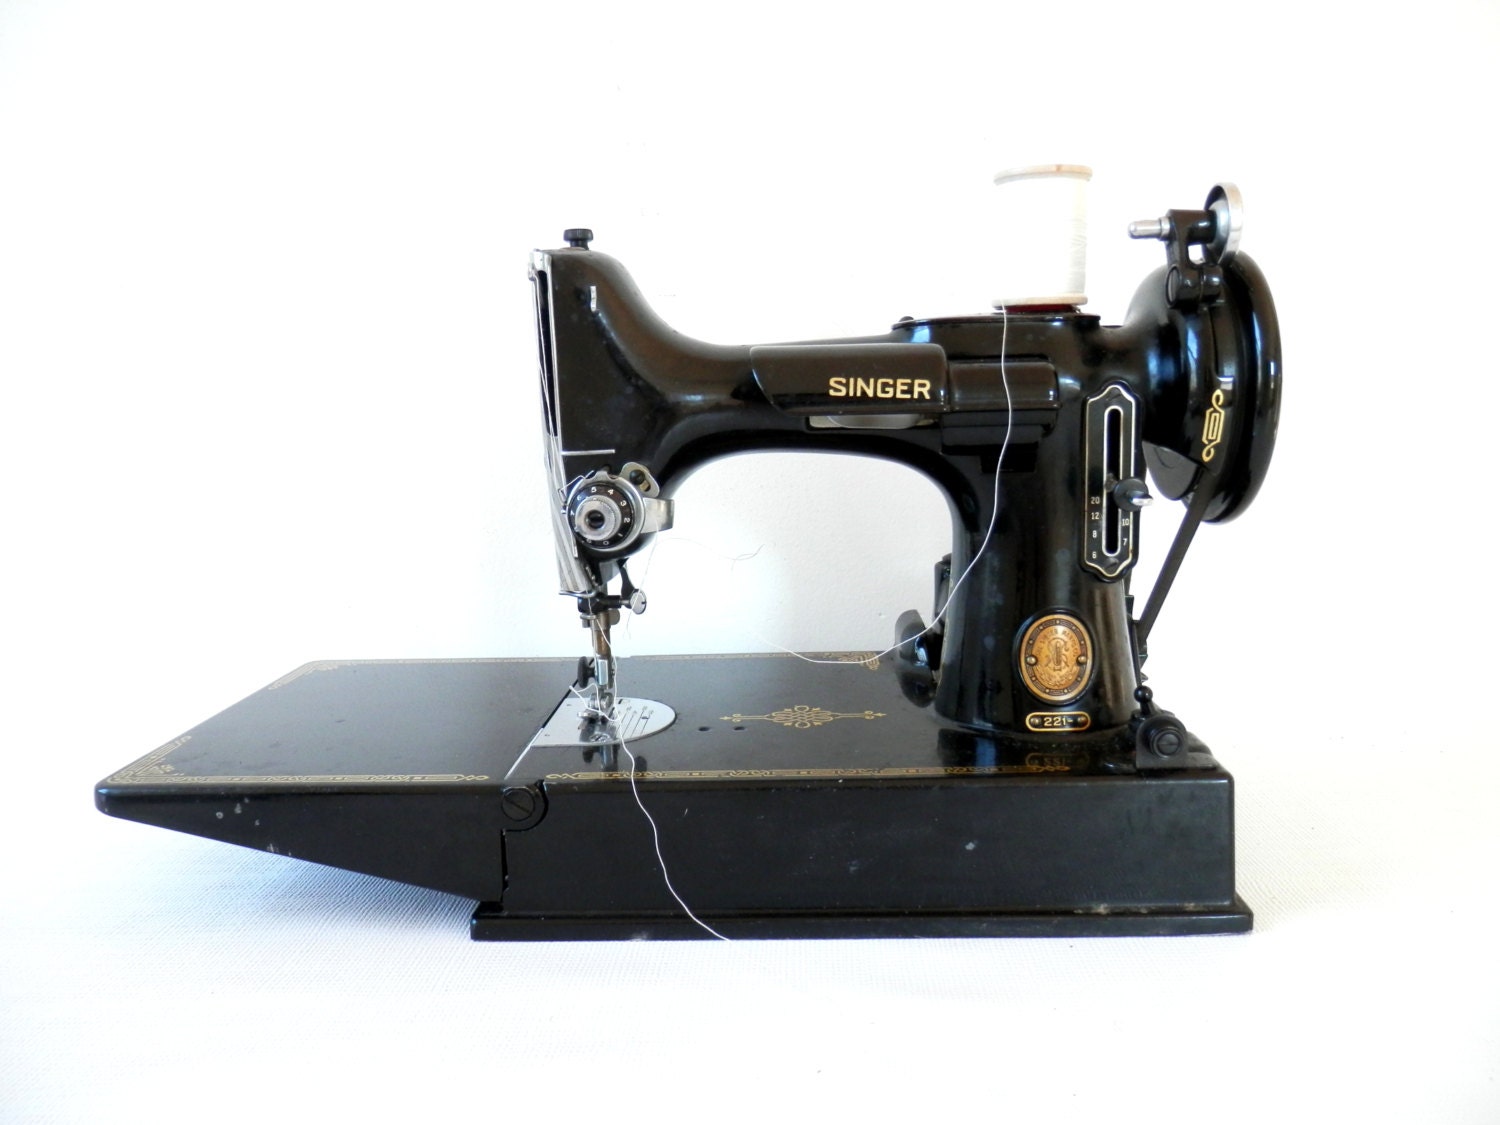 Singer Featherweight Sewing Machine Model 221-1 Portable